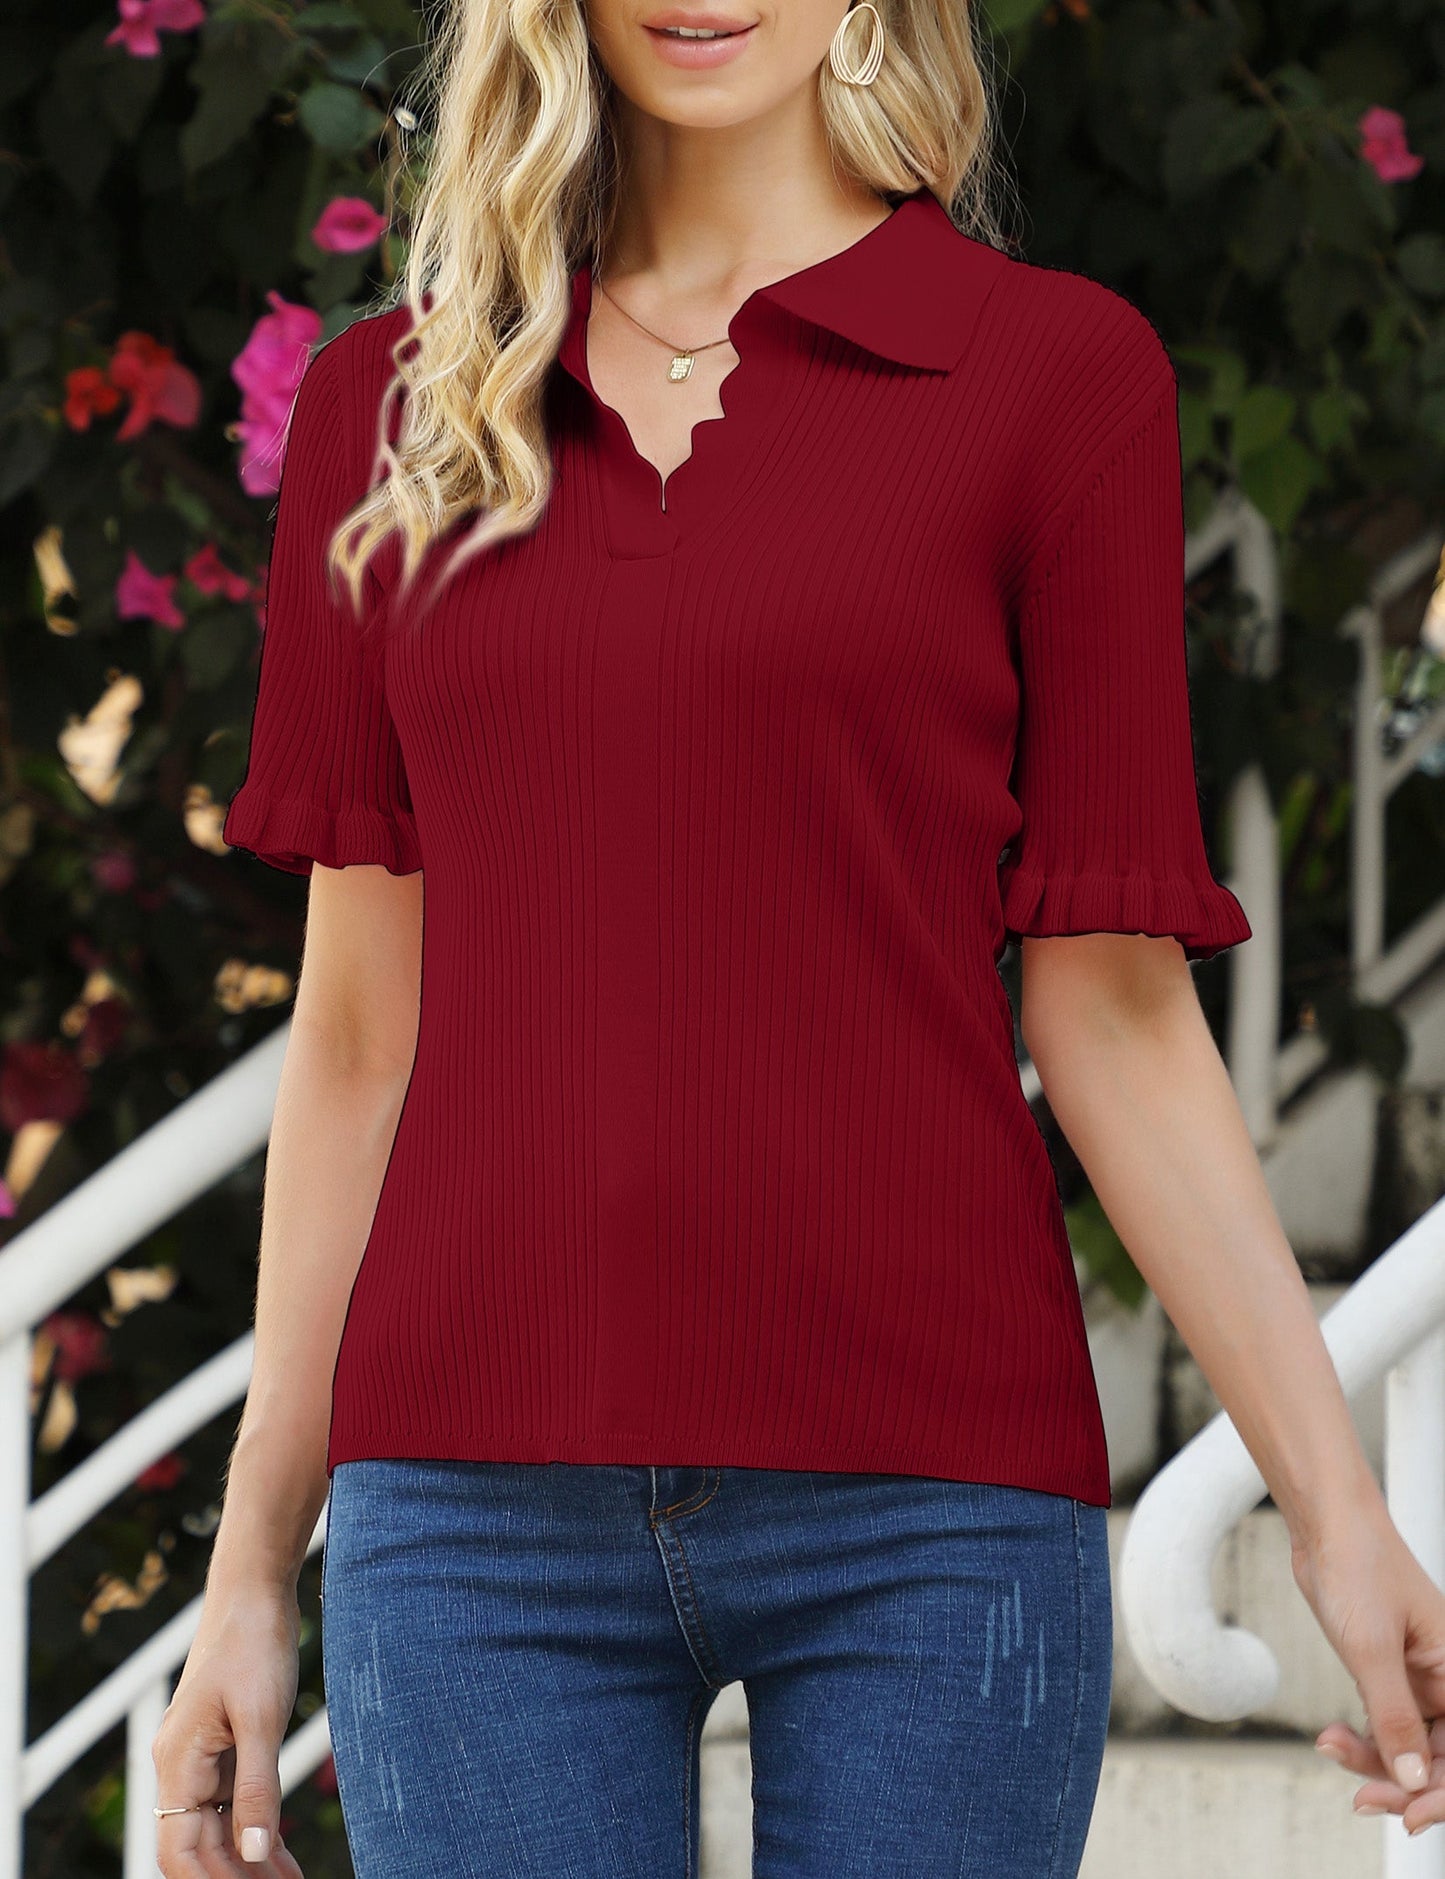 CLEARLOVE Womens Short Sleeve Polo Sweaters Ruffle Knit Tops Wine Red